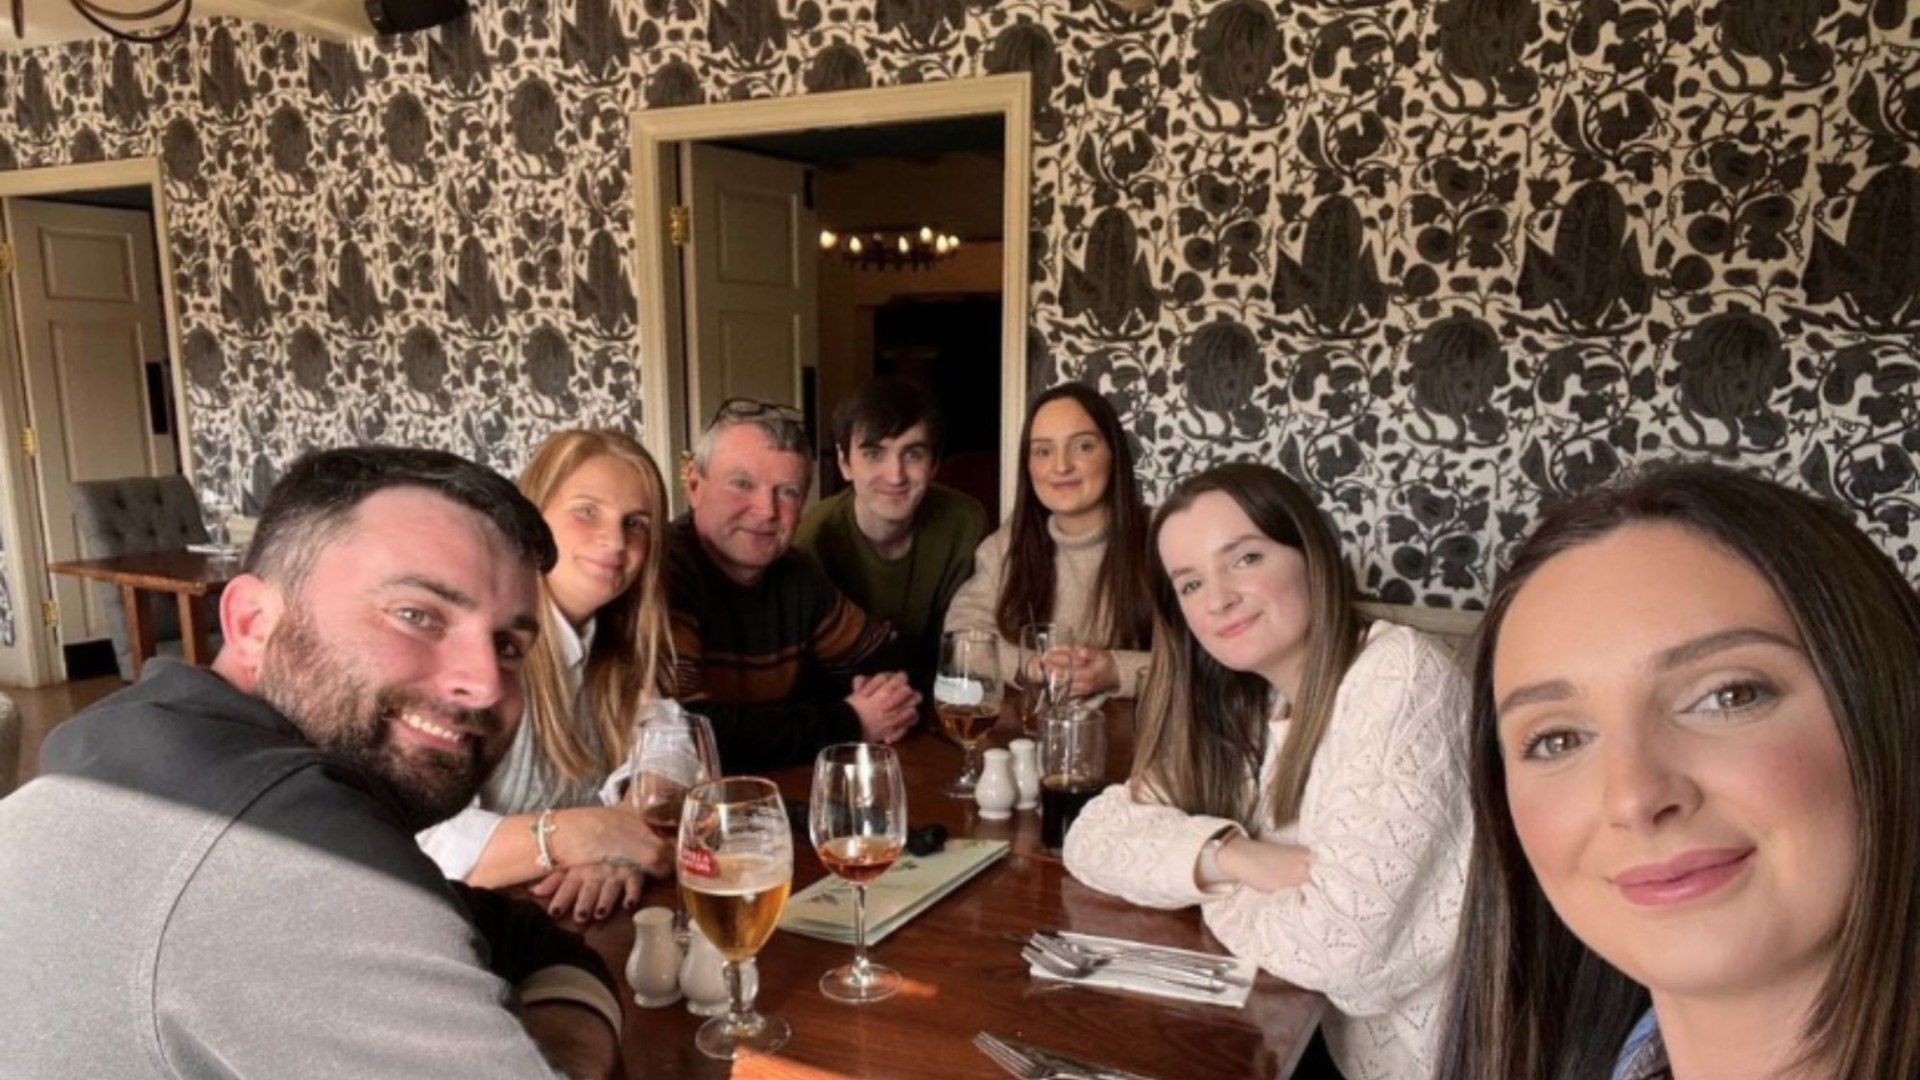 Sue & Noel Radford’s son Chris surprises family at birthday lunch – a rare appearance among siblings